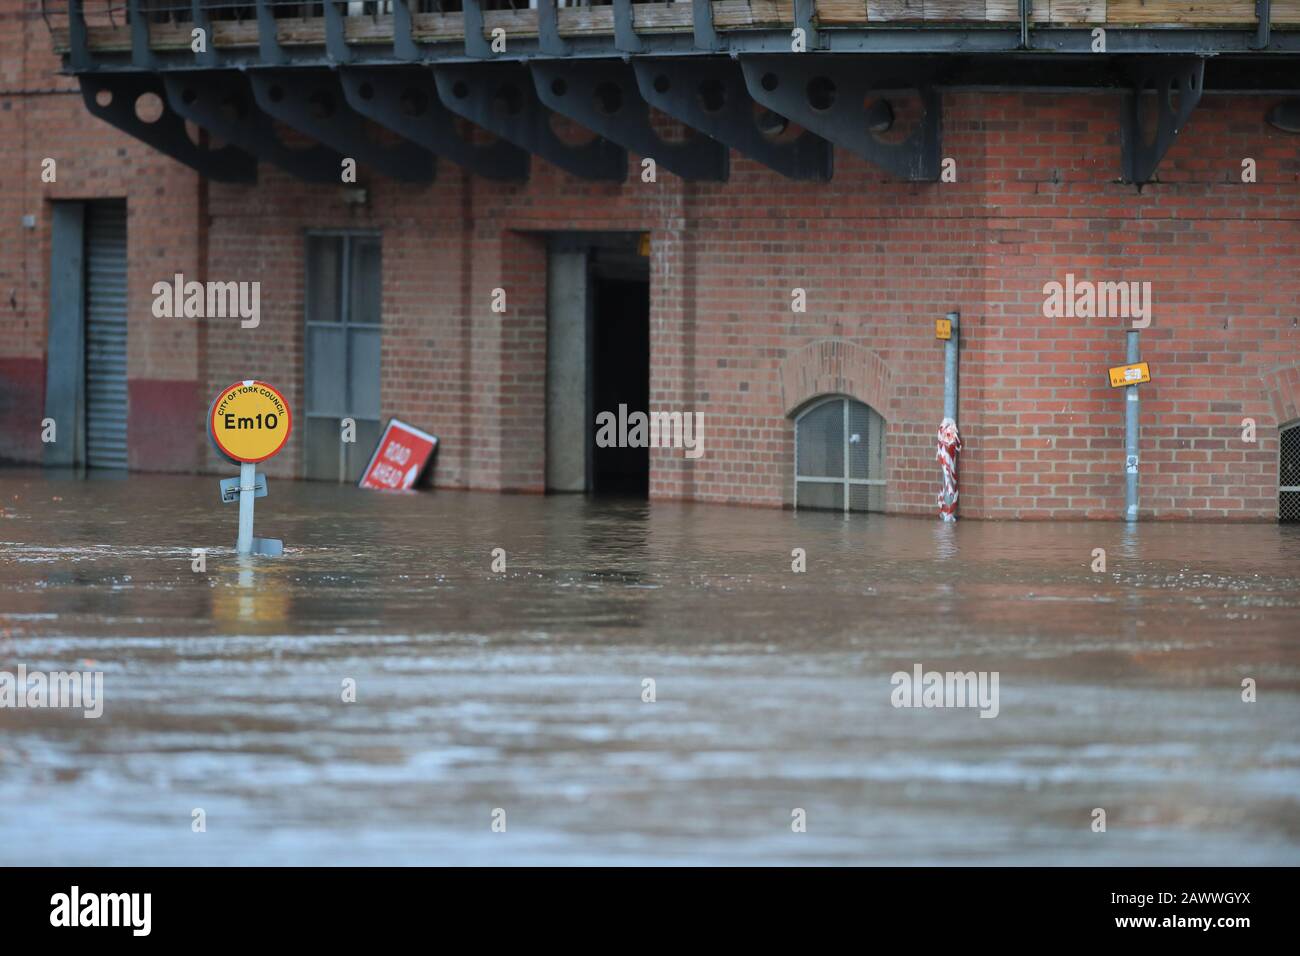 Floodwater in York after the River Ouse burst its banks in the aftermath of Storm Ciara which lashed the country Sunday. Stock Photo